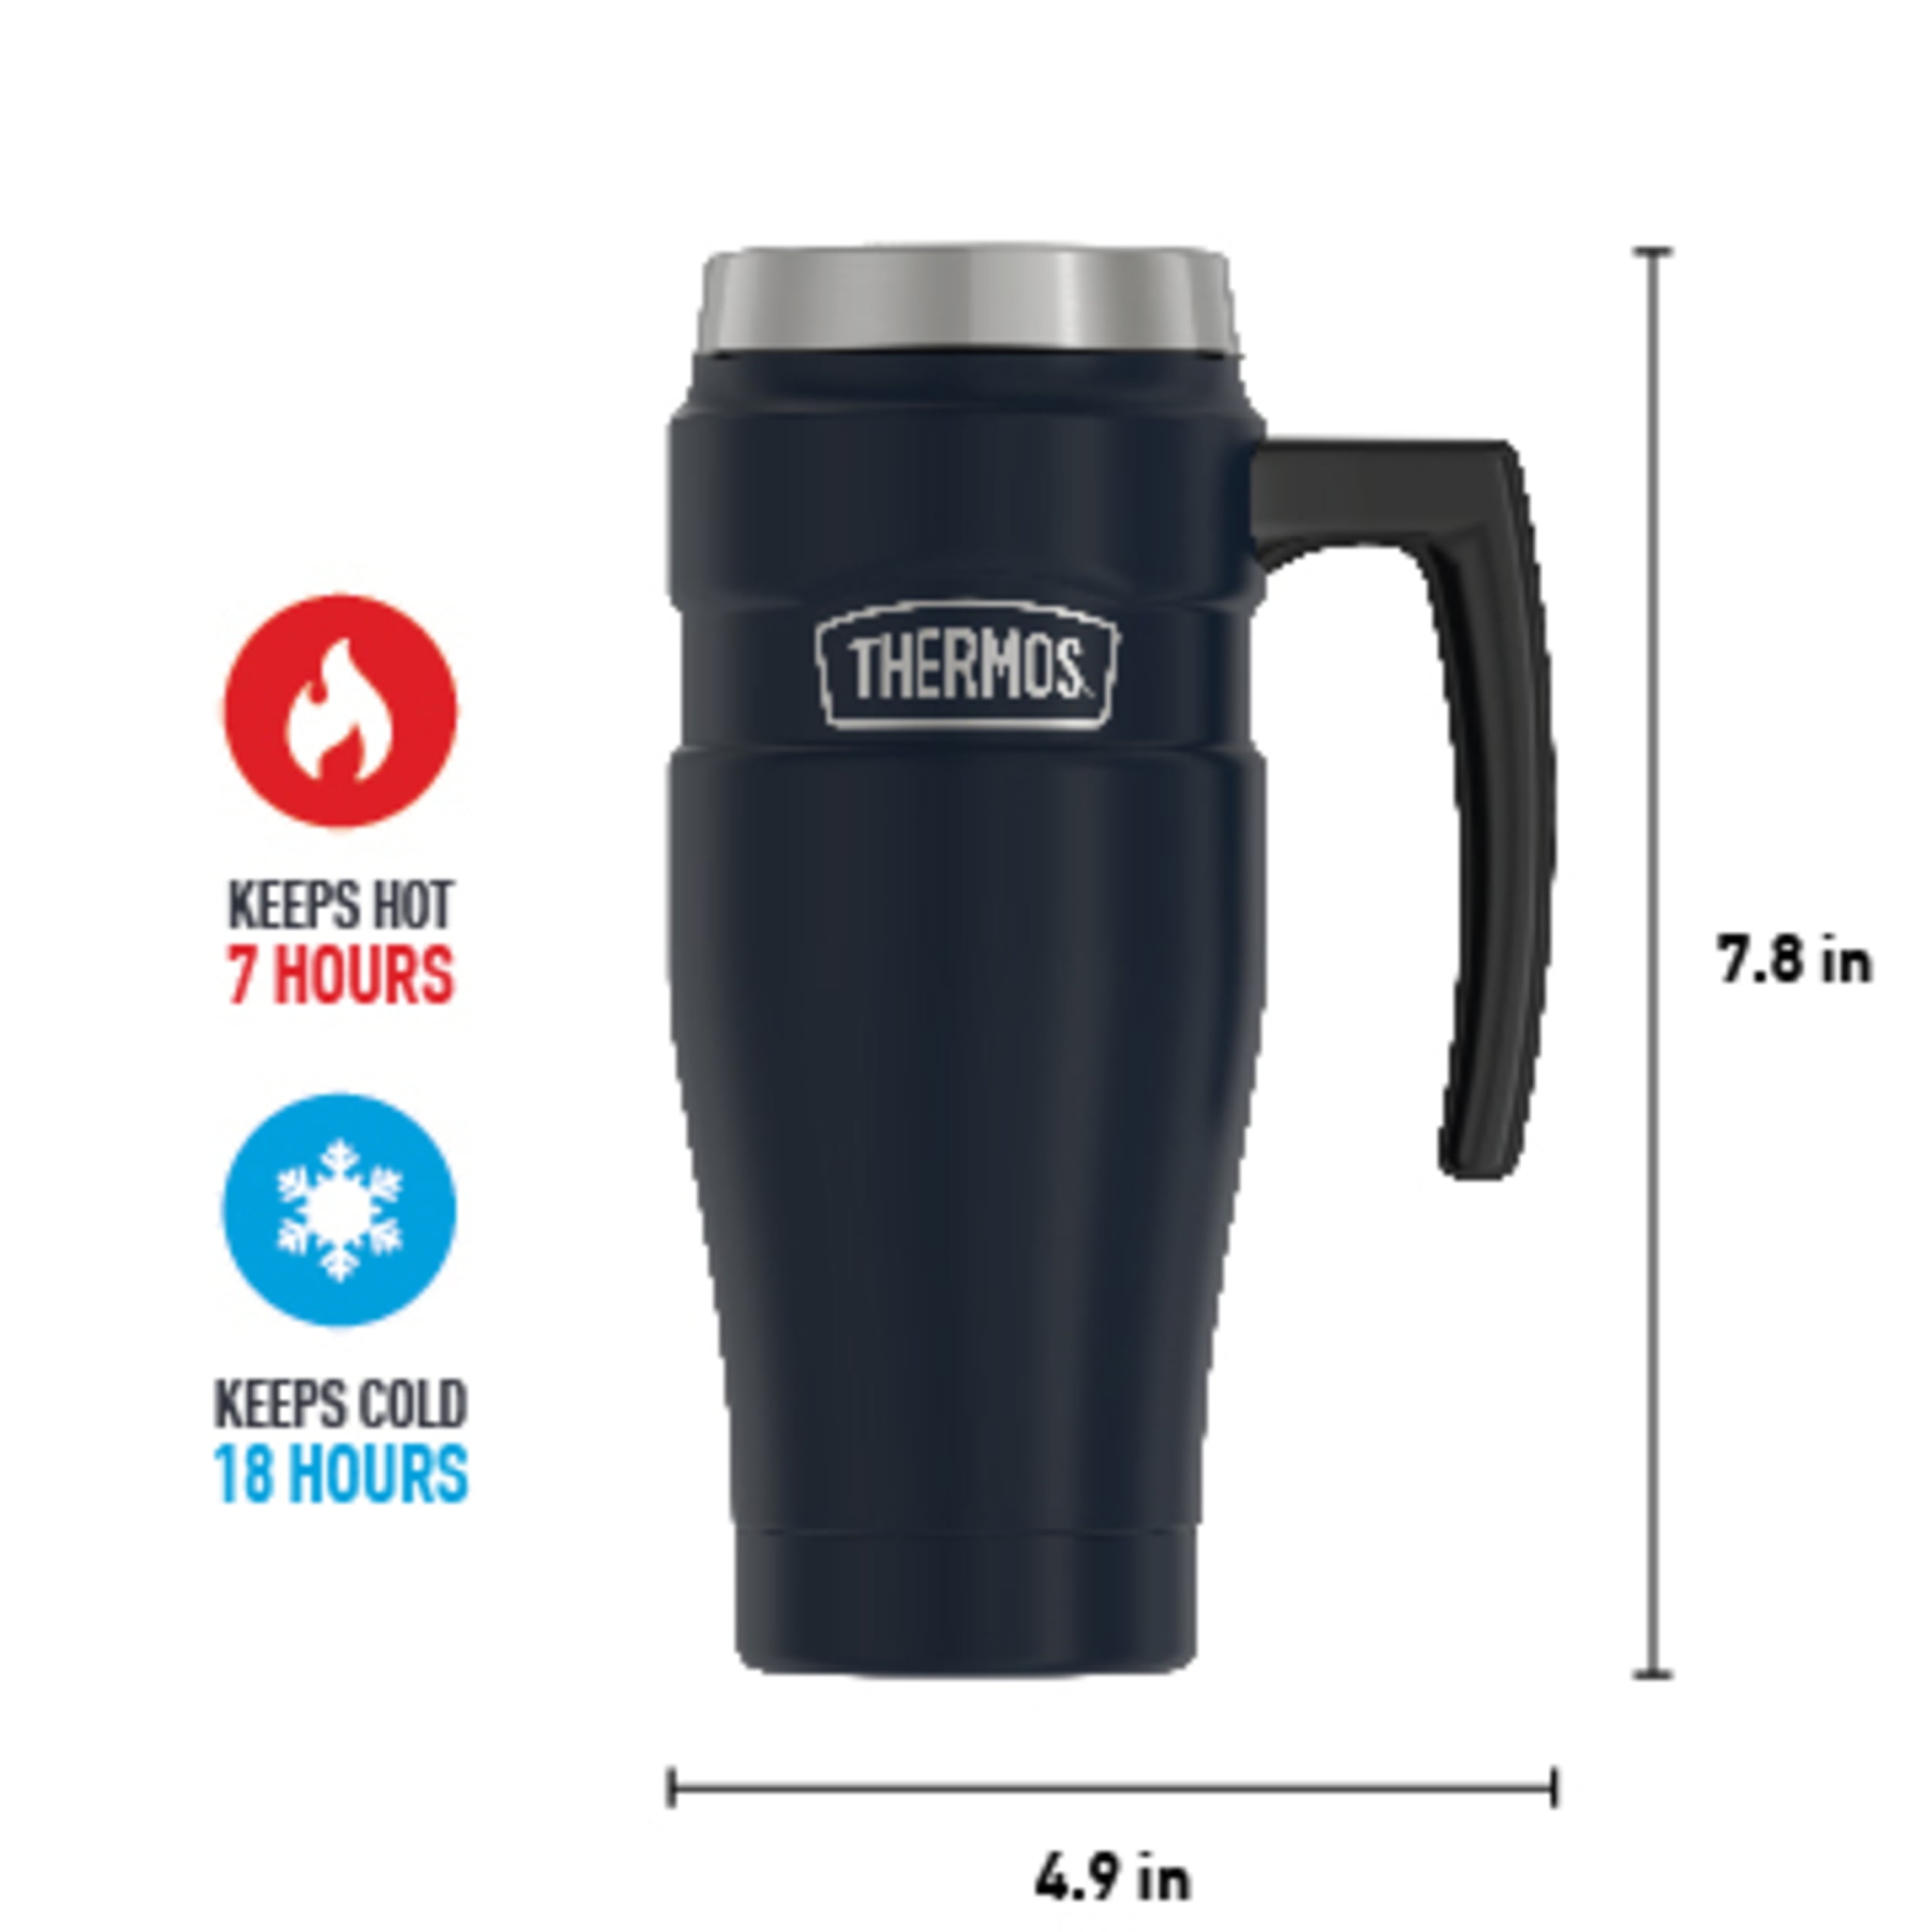 Thermos Stainless King Travel Mug with Handle (Brushed St/St